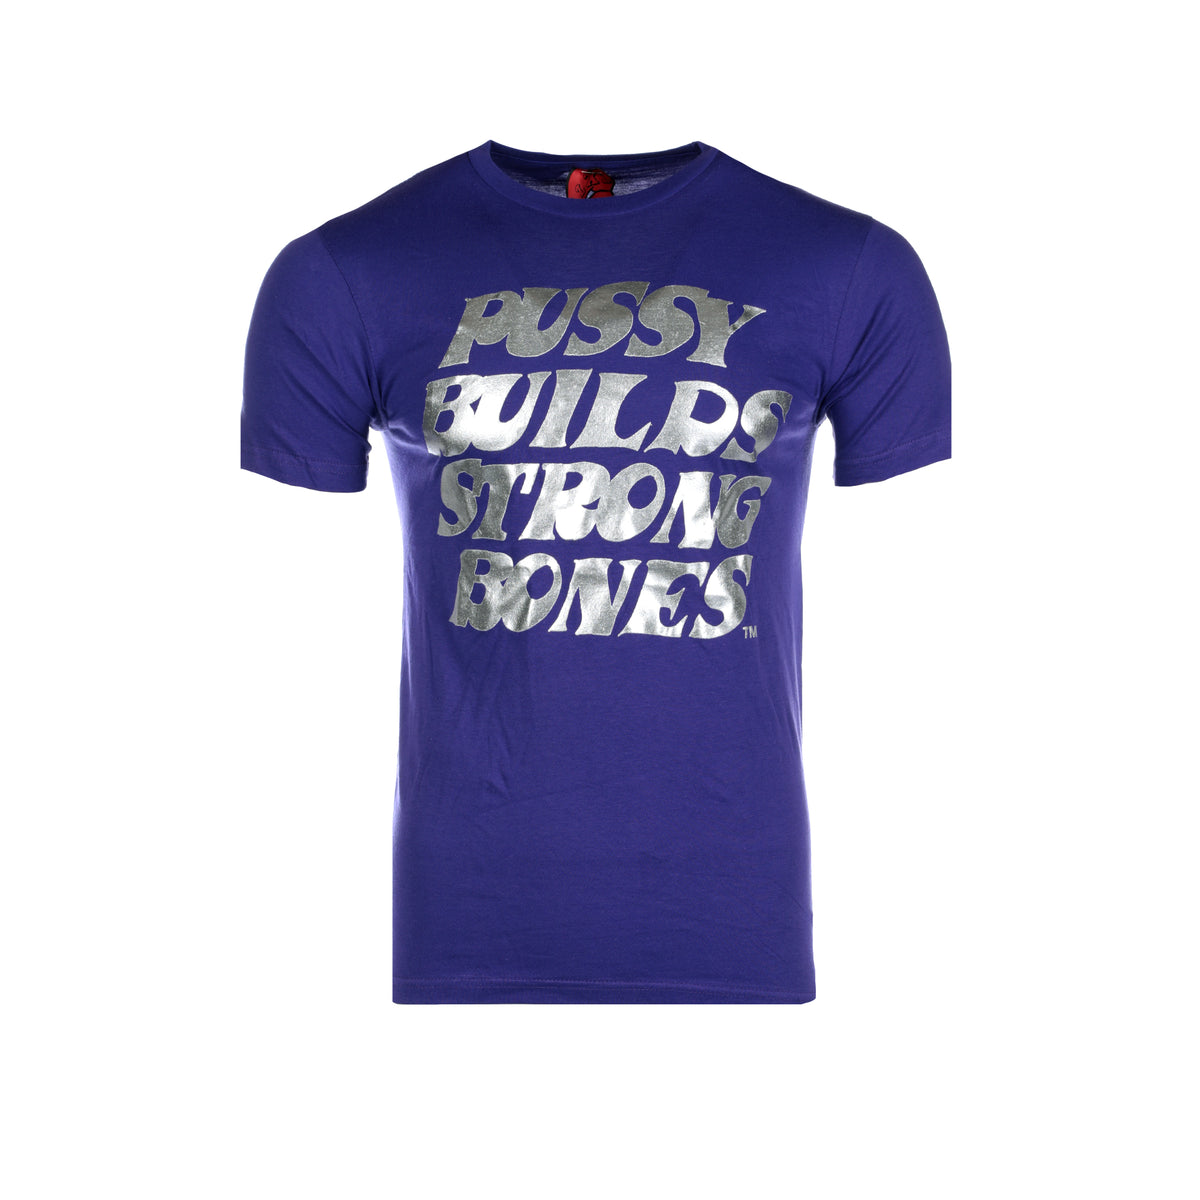 Pussy Builds Strong Bones T-Shirt